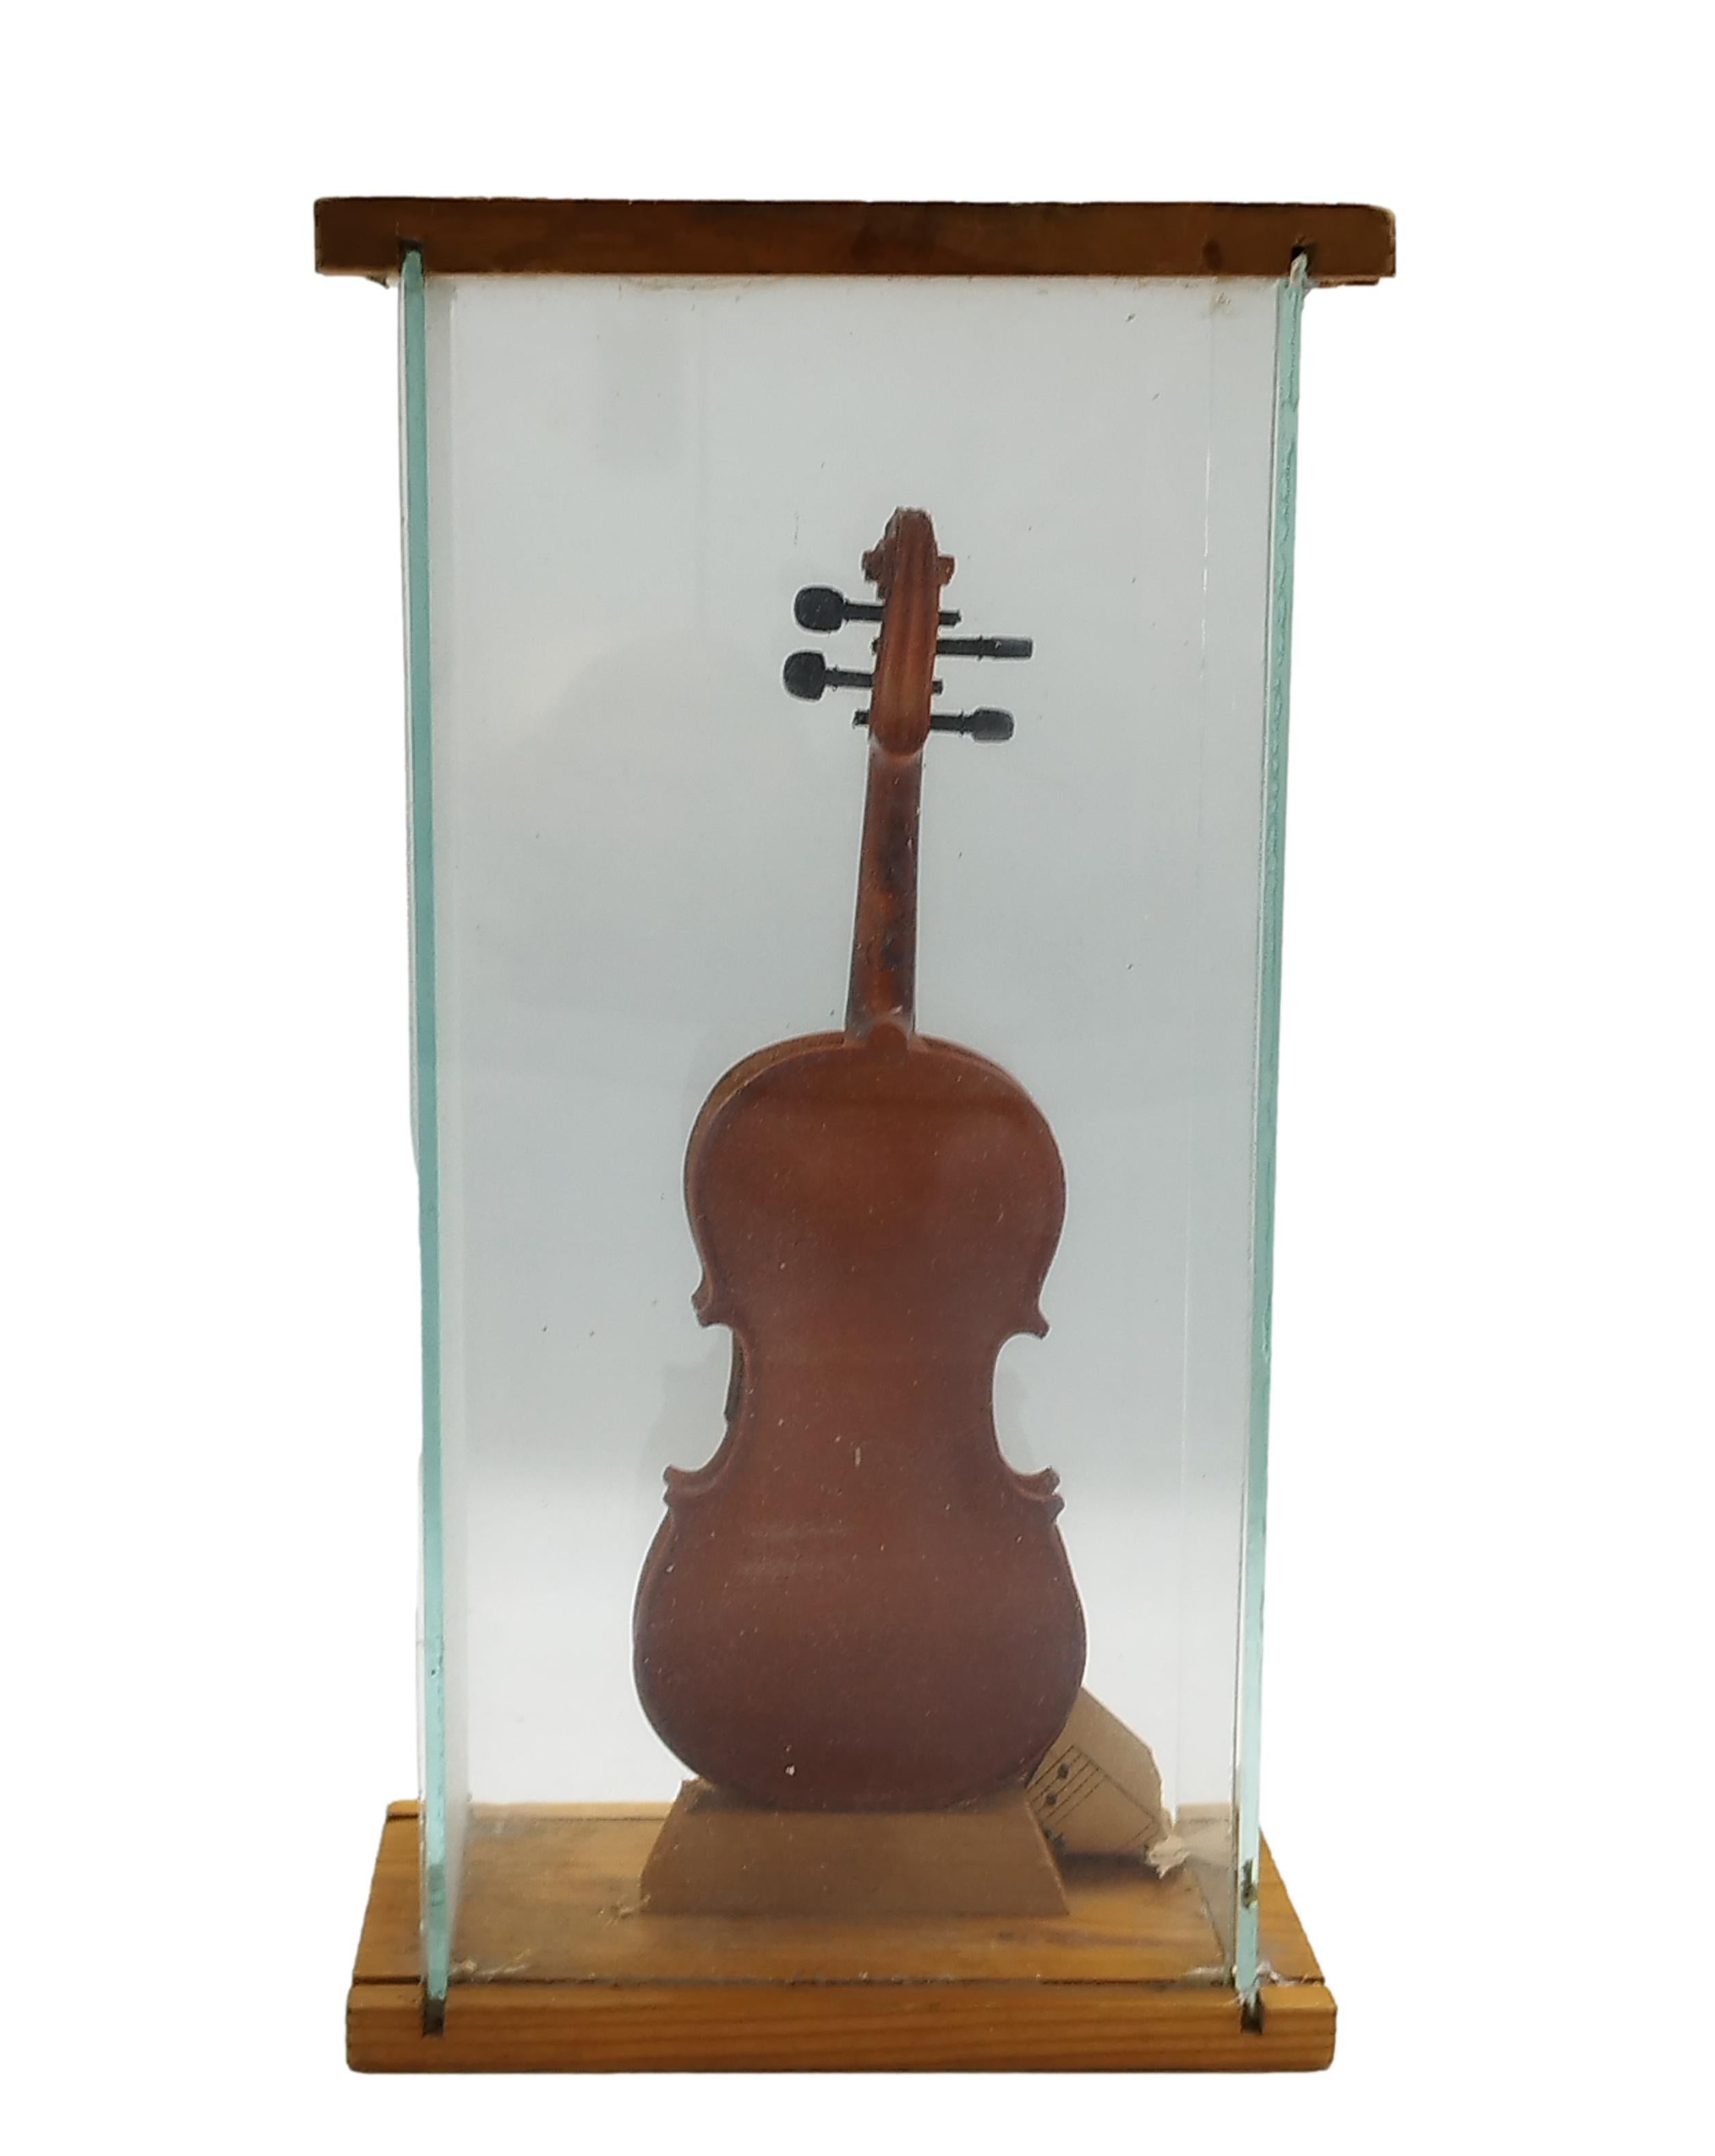 Assemblage, violin, paper collage on board, plexiglass case.
Chiari freely uses painting, objects, drawing and collage of photocopies and photographs to create intriguing works.

Exhibitions: Back to Future, Glenda Cinquegrana: lo Studio,